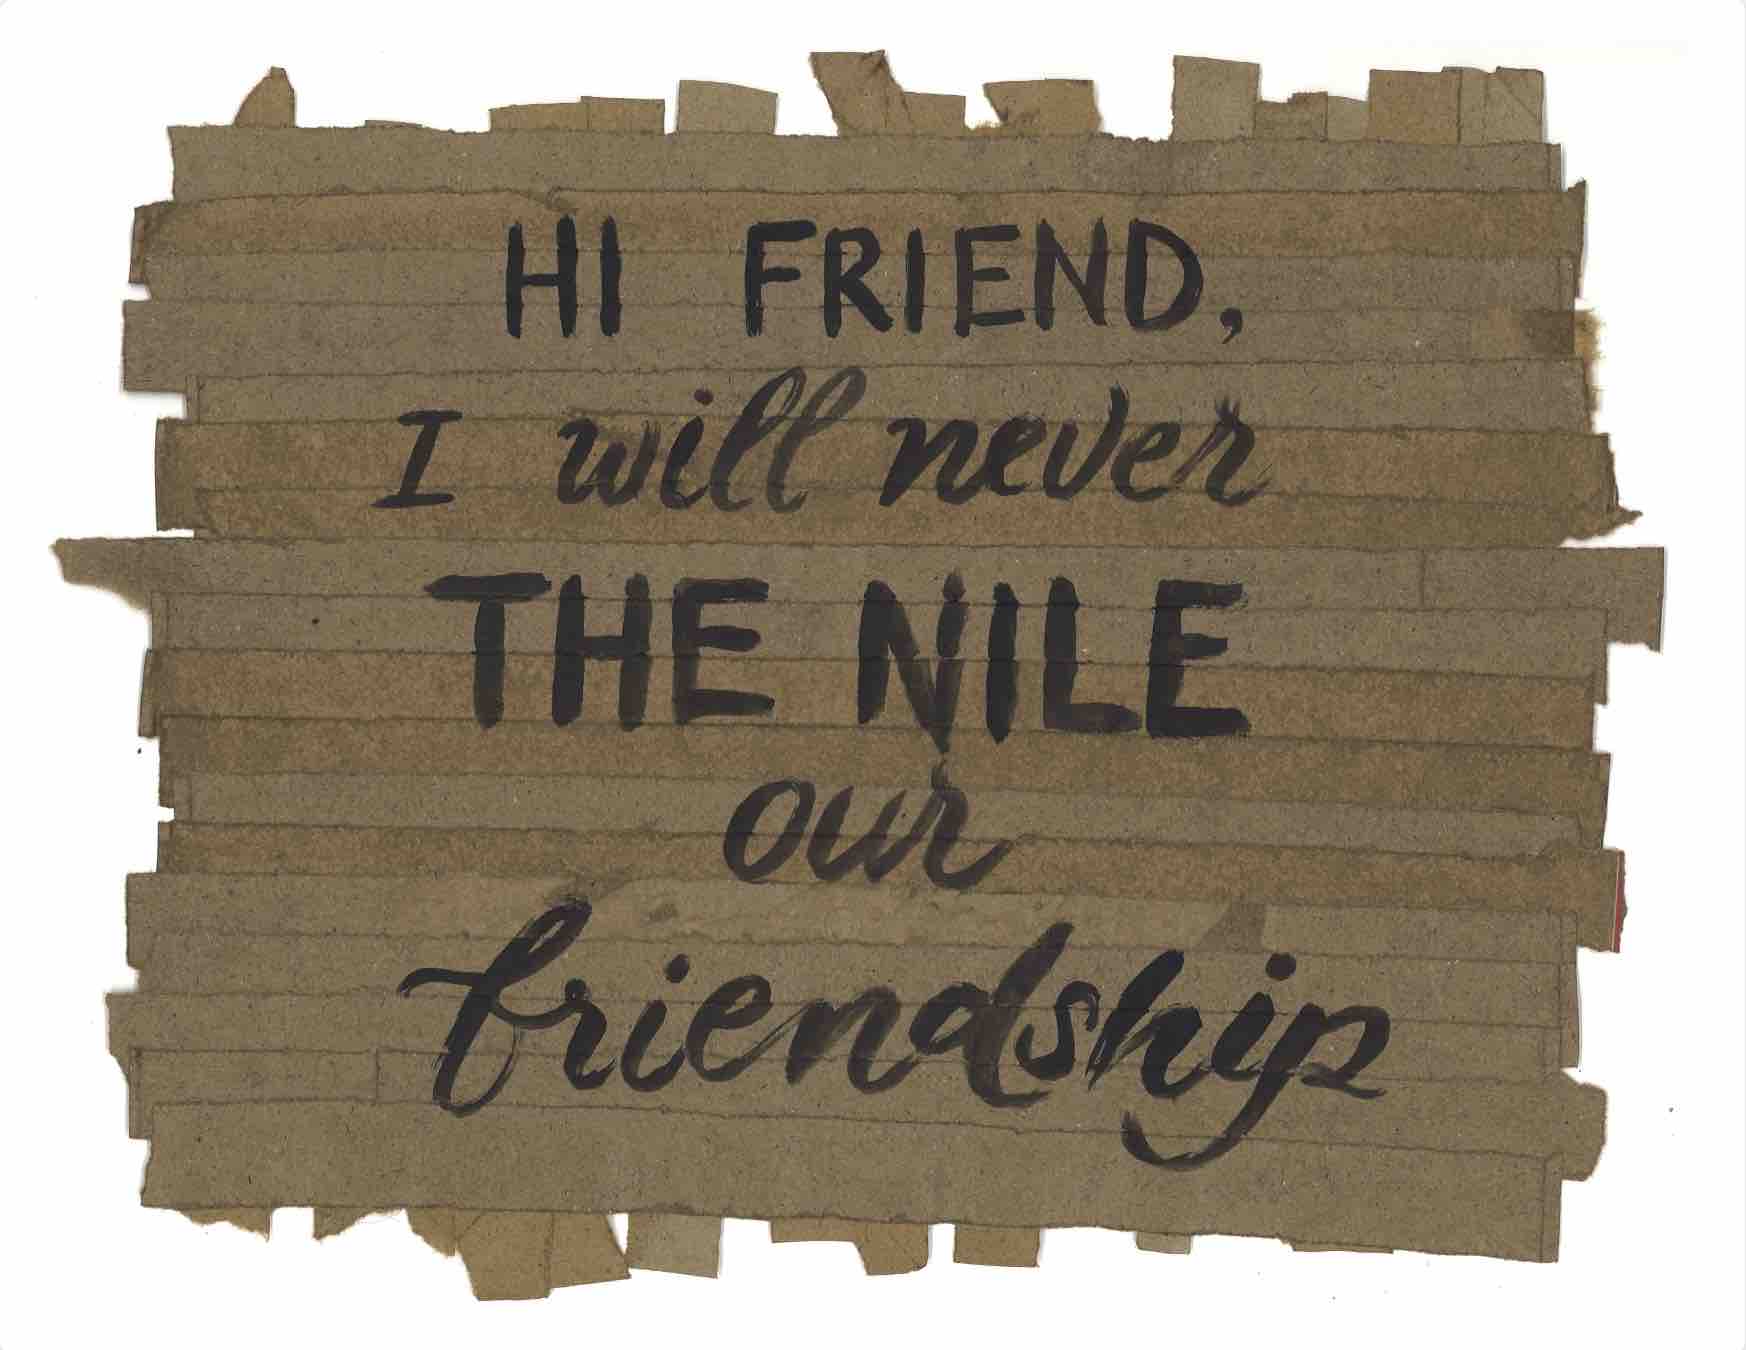 Hi friend, I will never THE NILE our friendship.